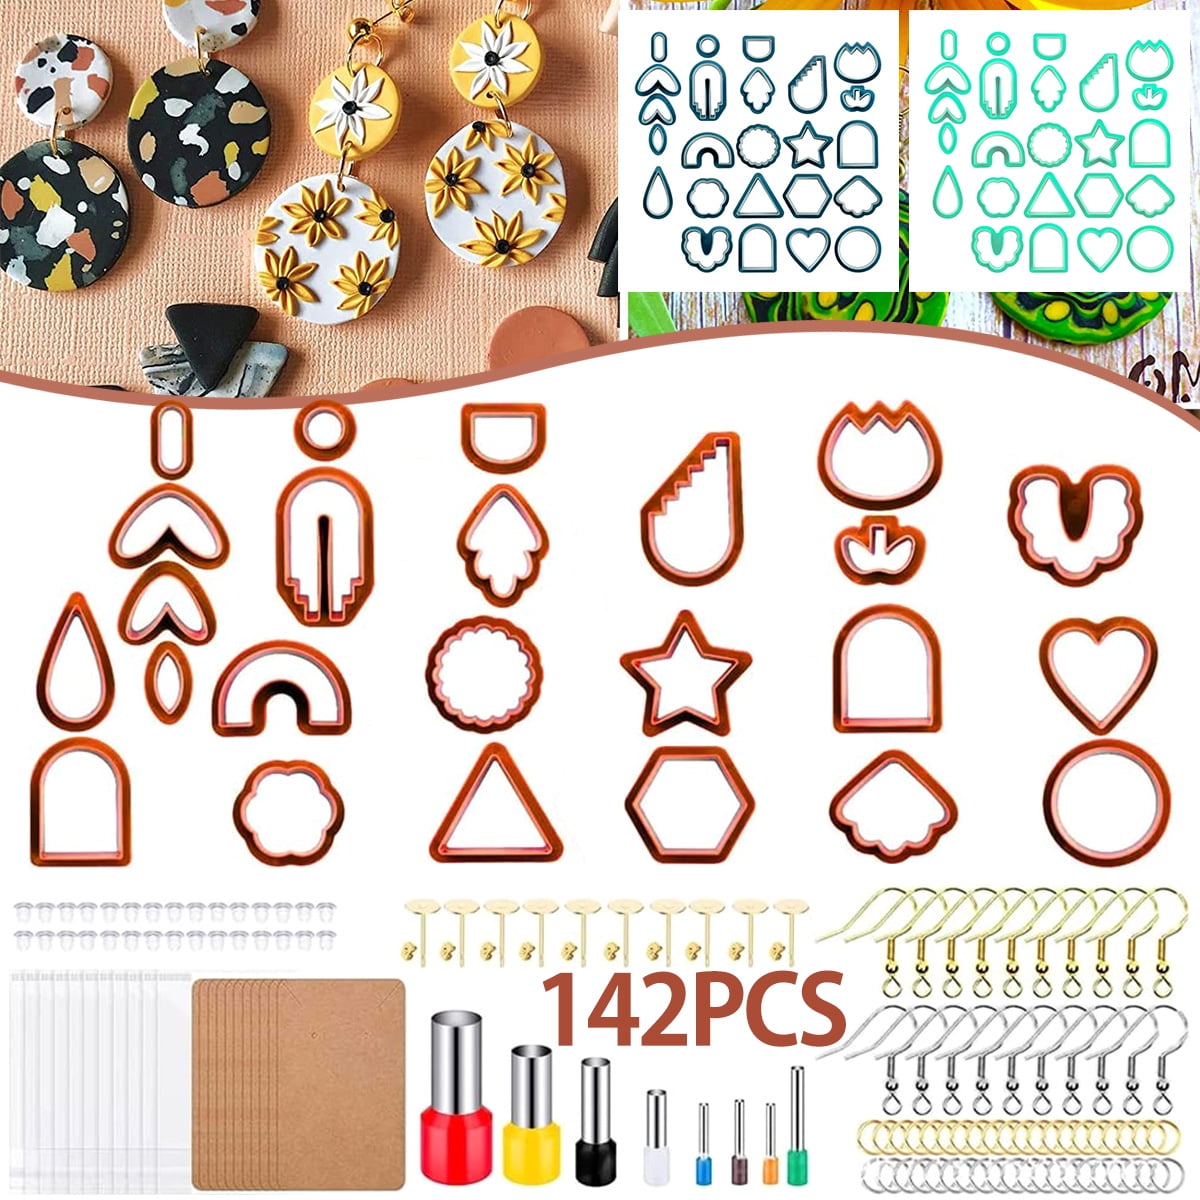 Polymer Clay Earring Making Kit- 30 Clay Earring Cutters, 24 Color Polymer  Clay, 8 Circle Cutters, Rollers, B7000 Glue, 640 PCS Earring Making Tools